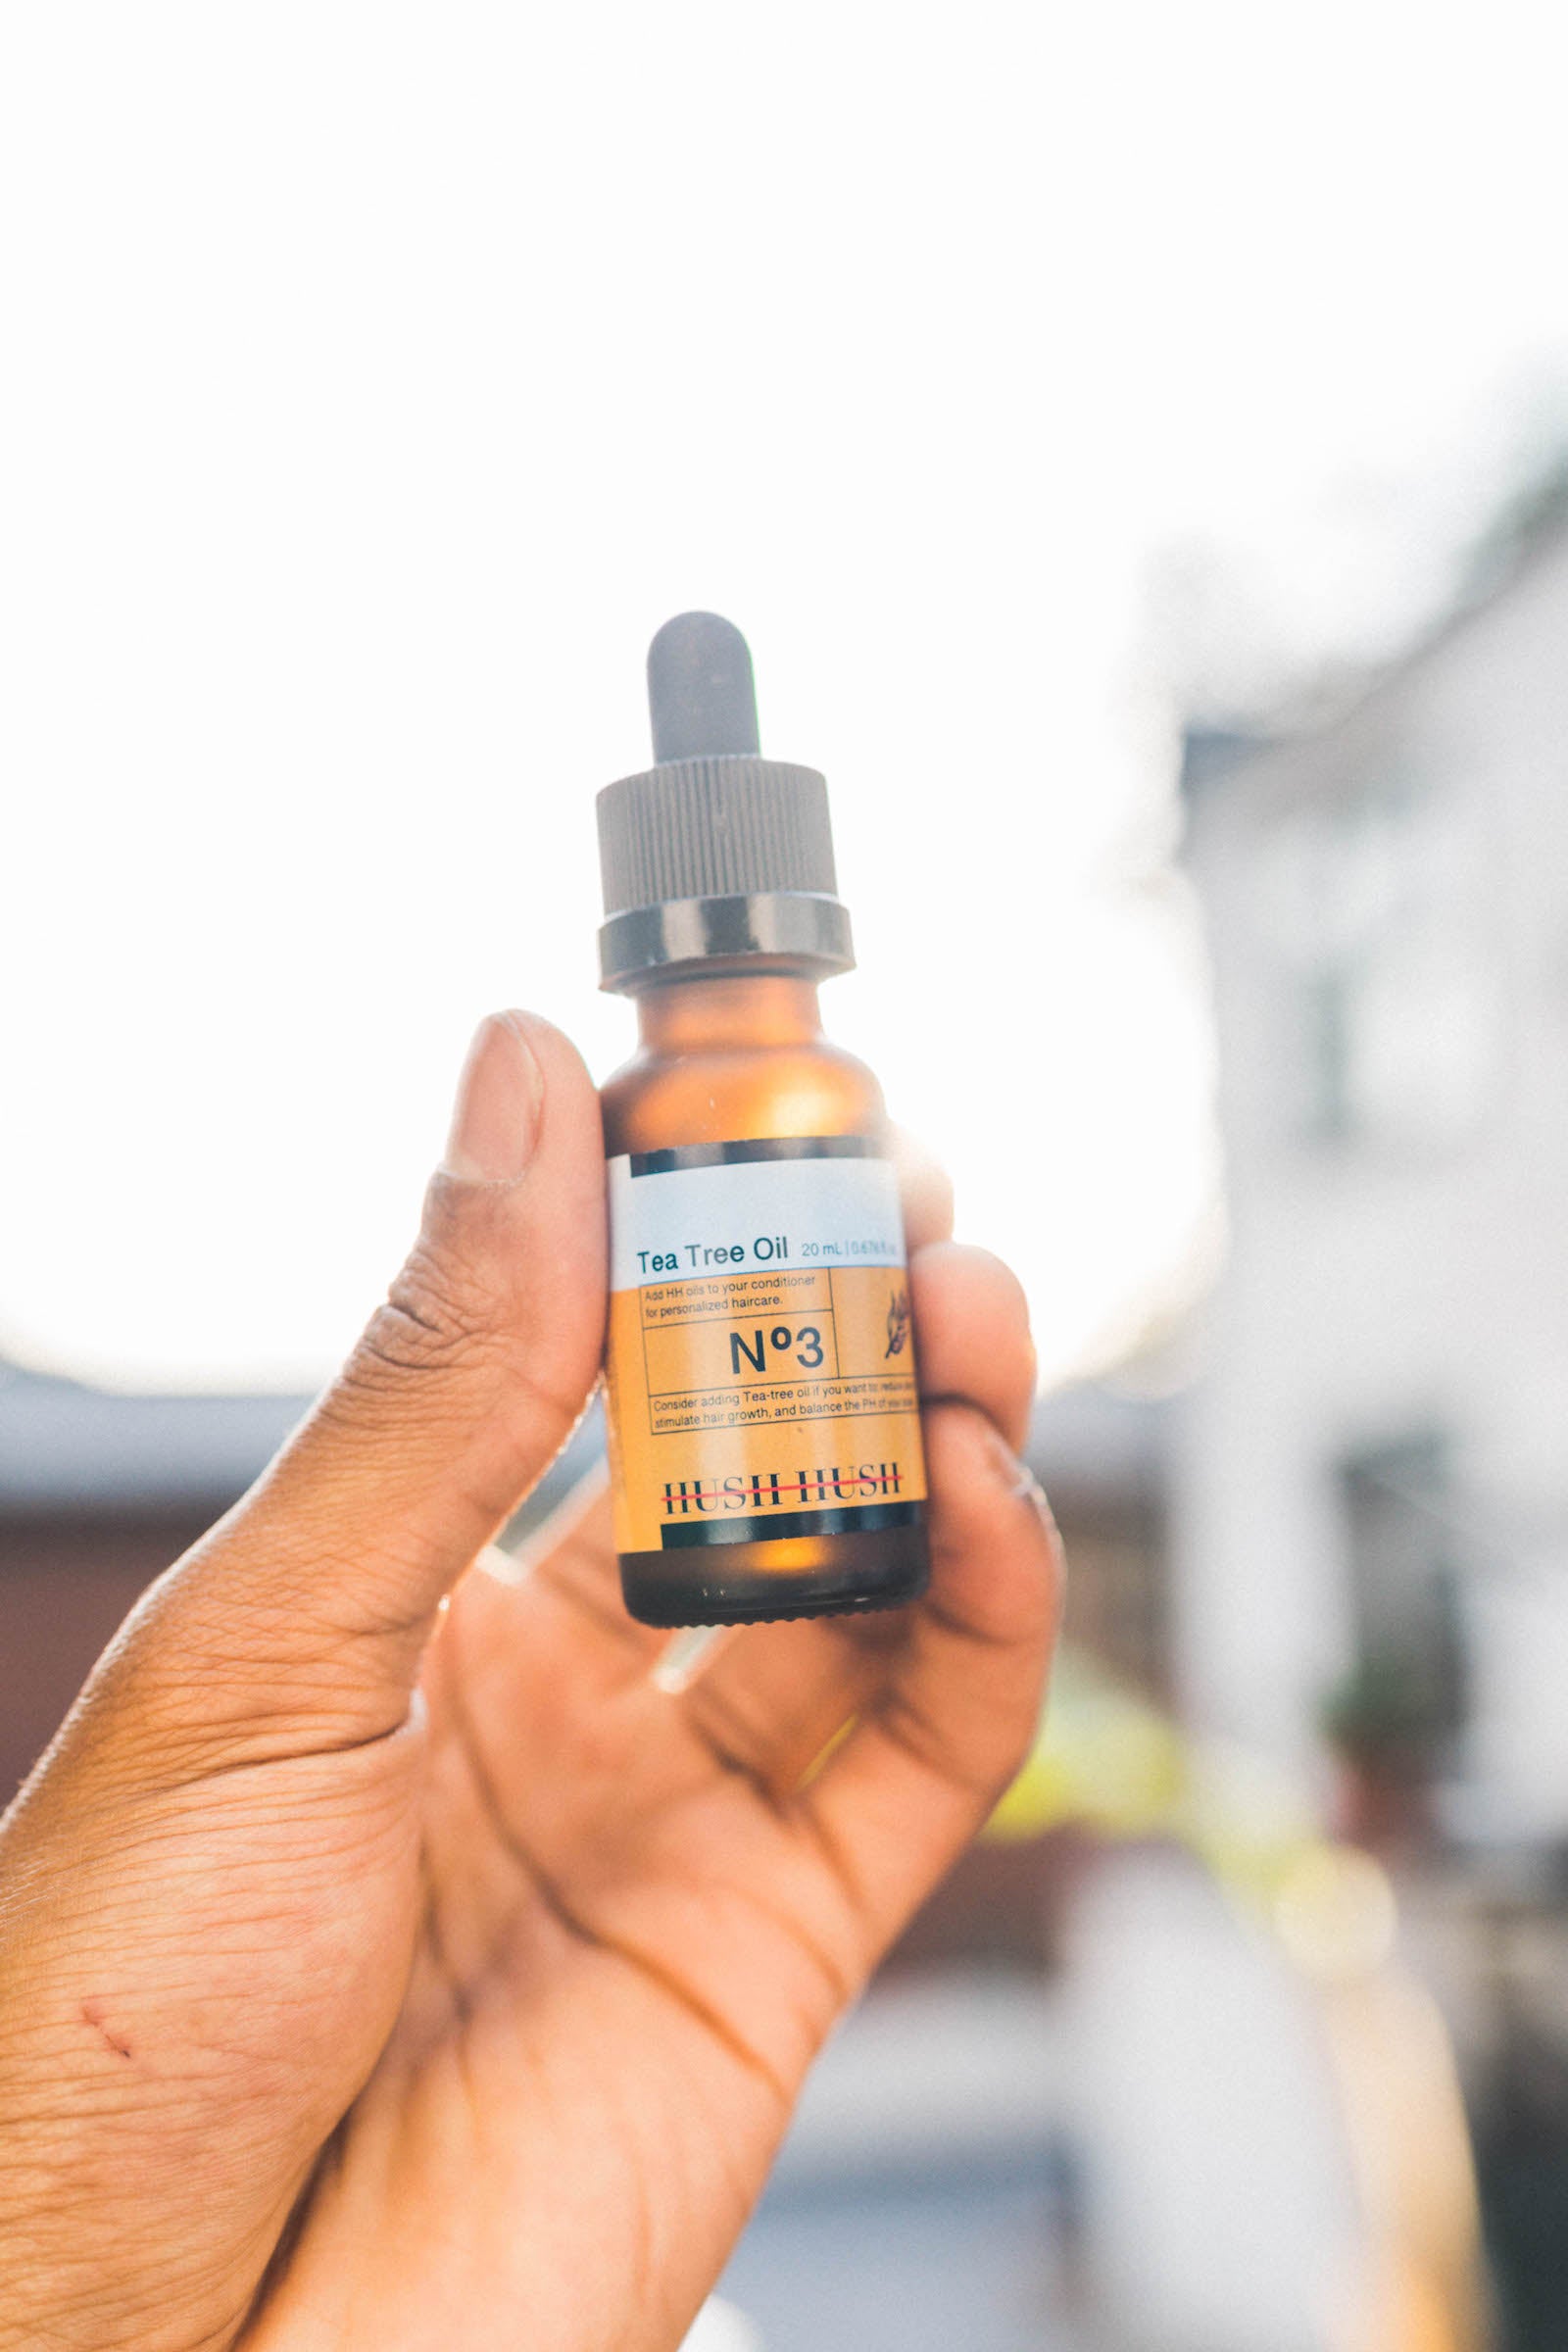 Tea tree oil being held up towards the sun. The perfect solution to encourage hair growth